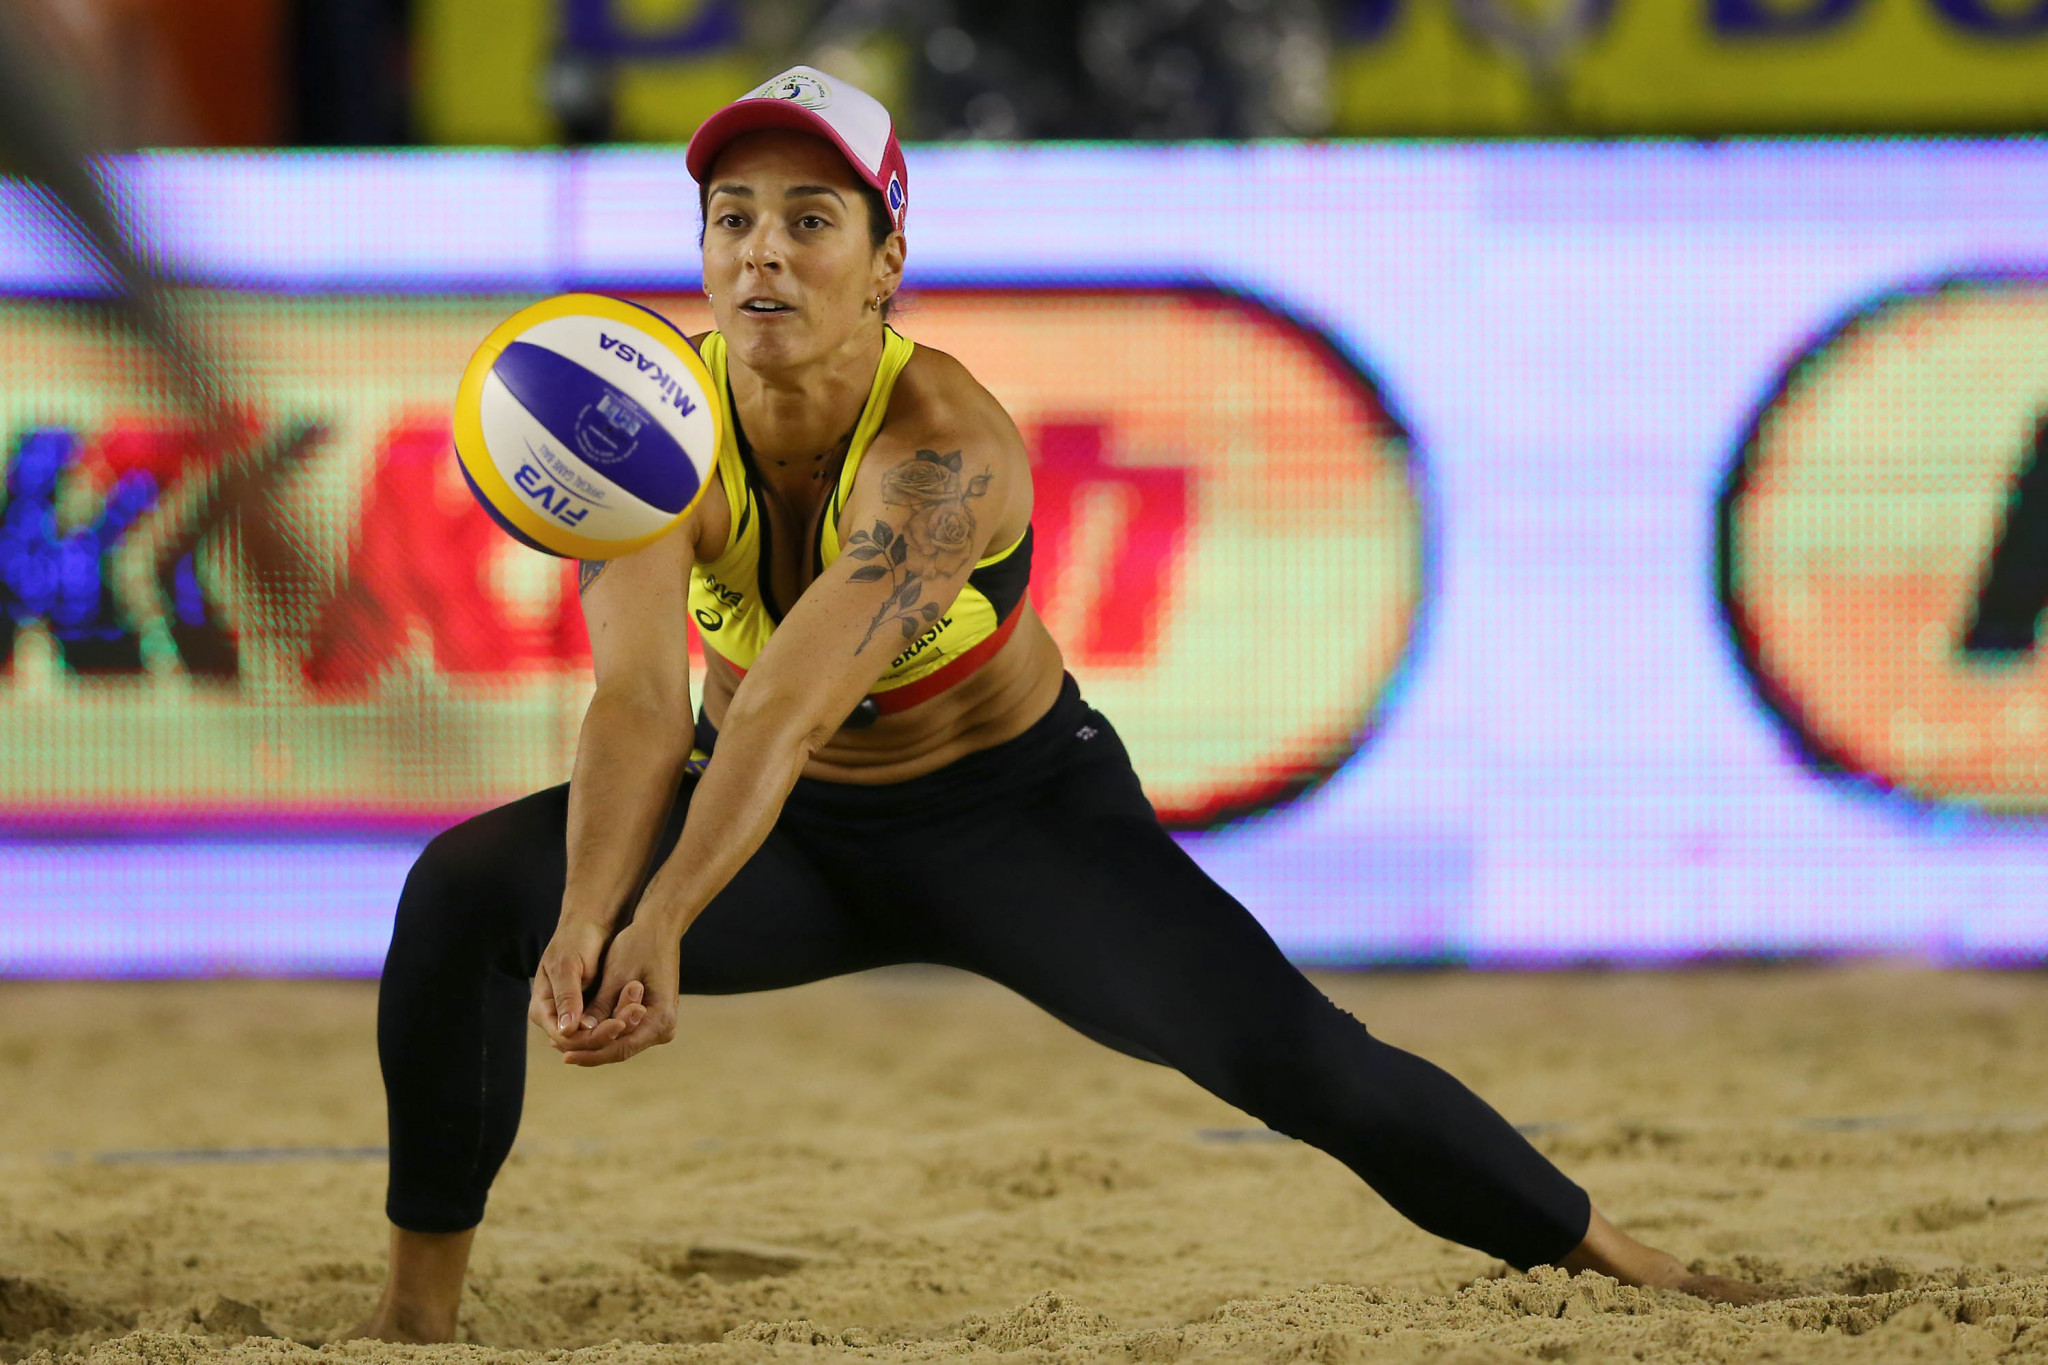 Brazil's Agatha Bednarczuk, pictured, and partner Duda Lisboa are undefeated in the women's event ©FIVB